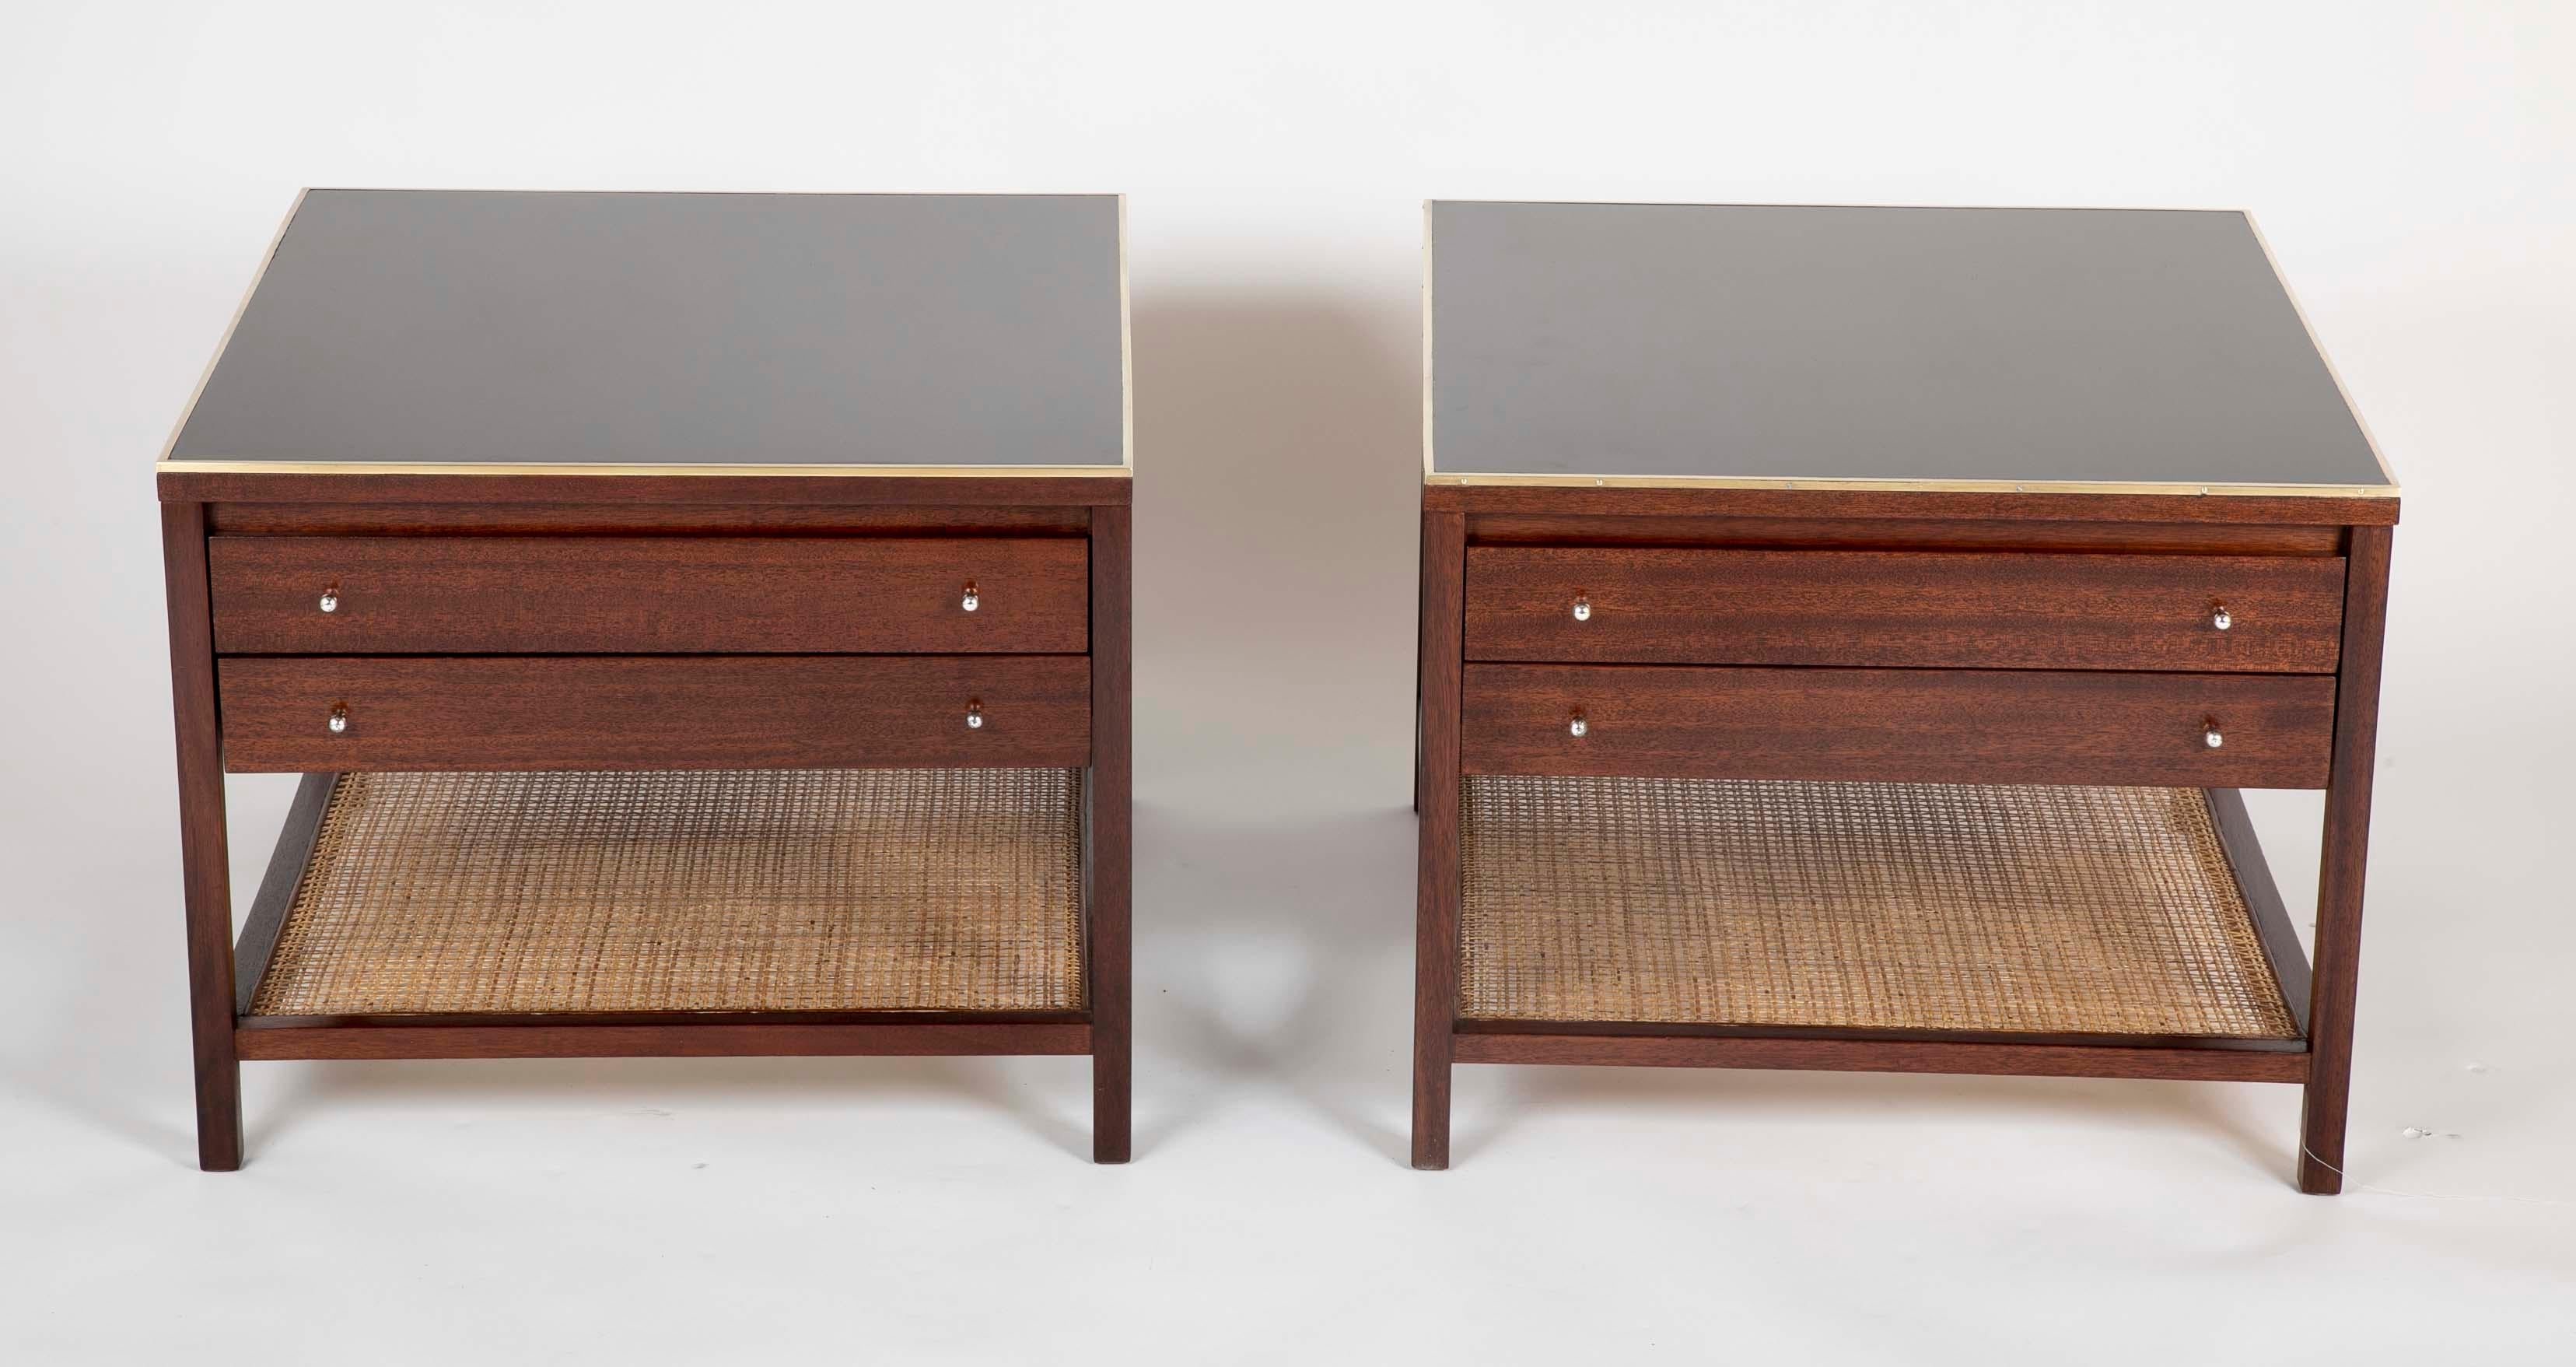 Pair of walnut Paul McCobb side tables with black leather tops, brass trim and caned lower shelf, 1960s.